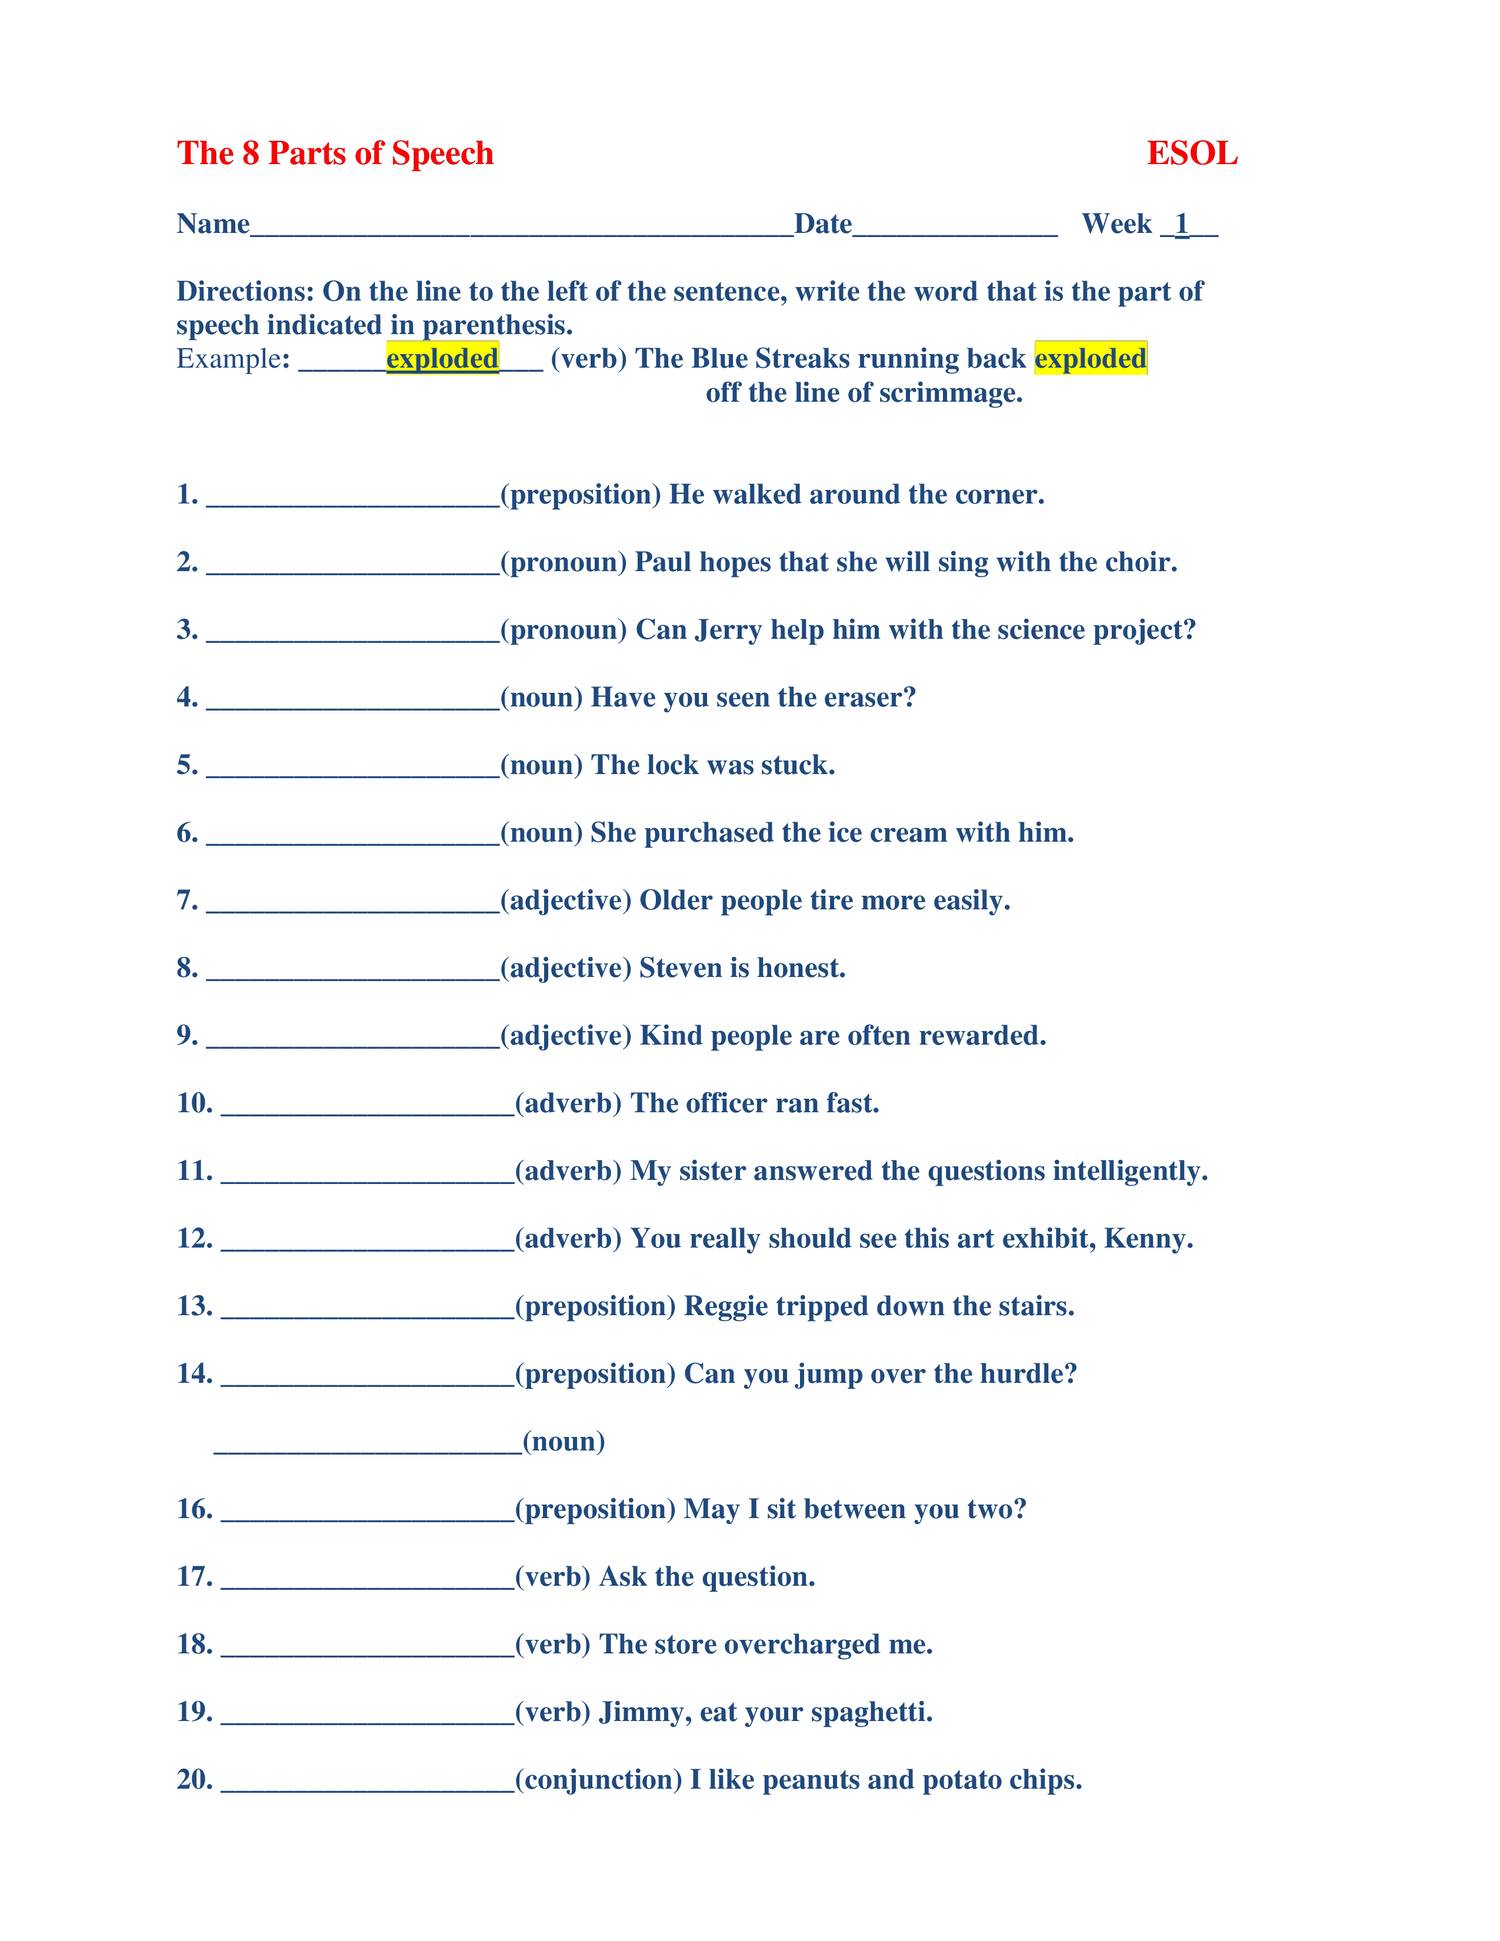 Week 1 The 8 Parts Of Speech Worksheet docx DocDroid